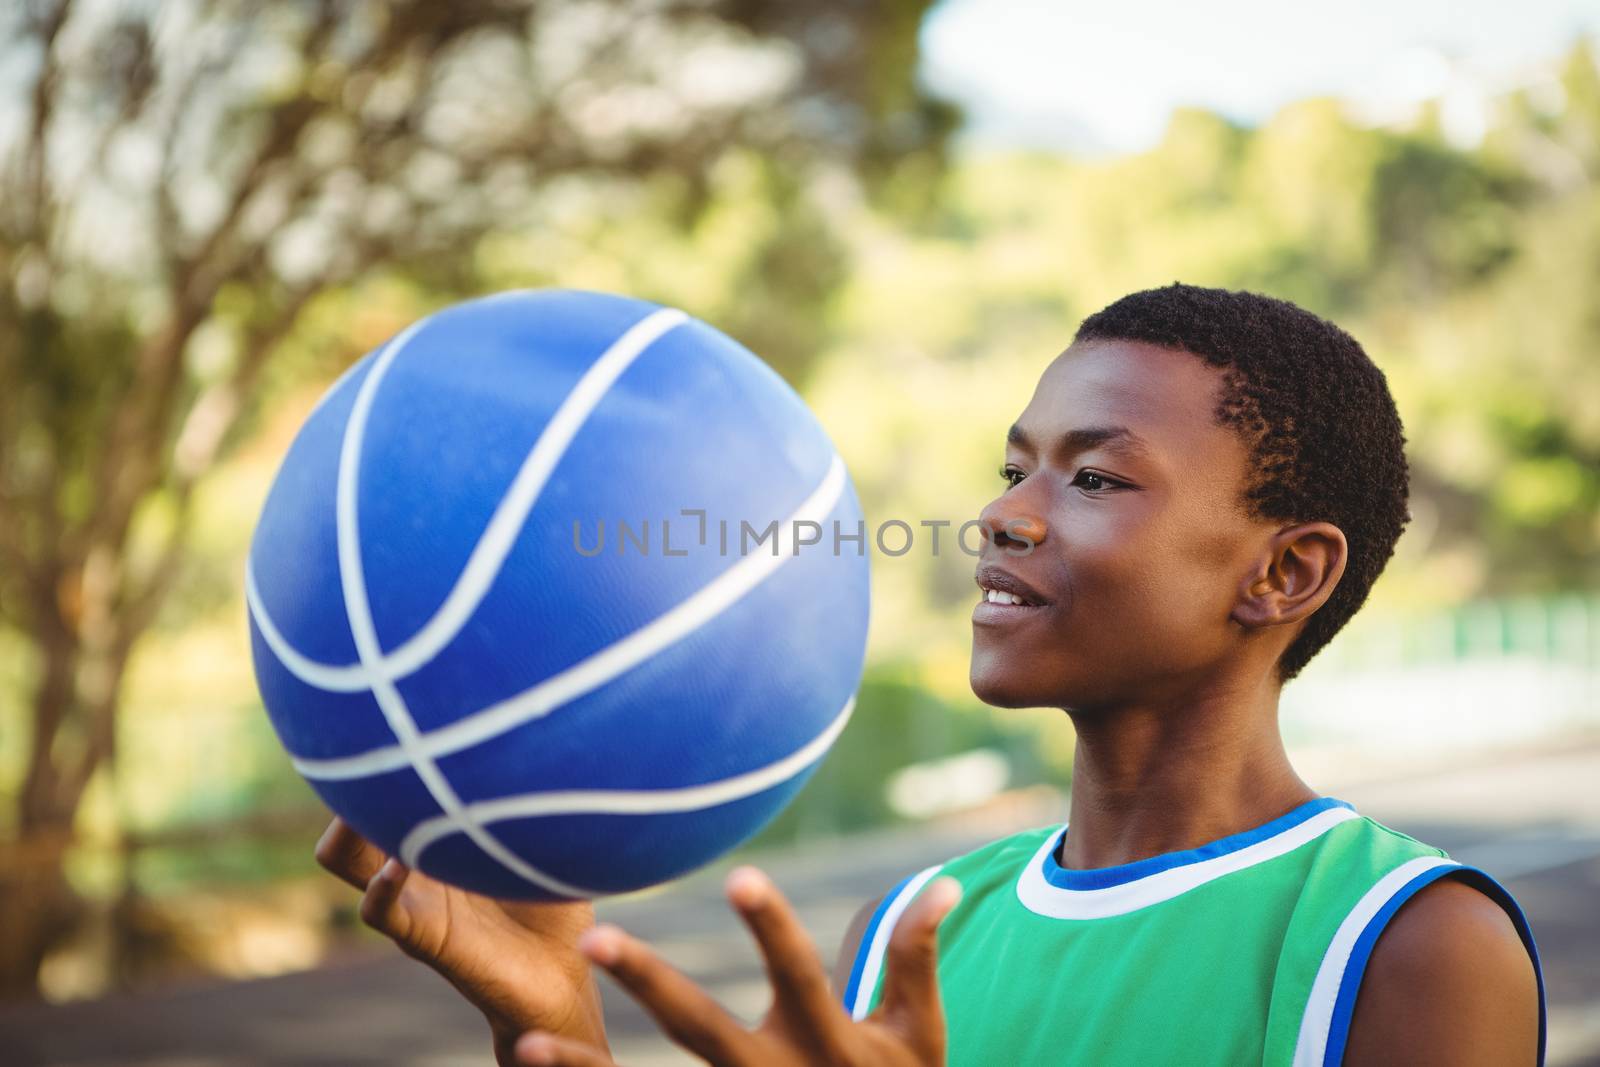 Smiling young man playing with basketball by Wavebreakmedia